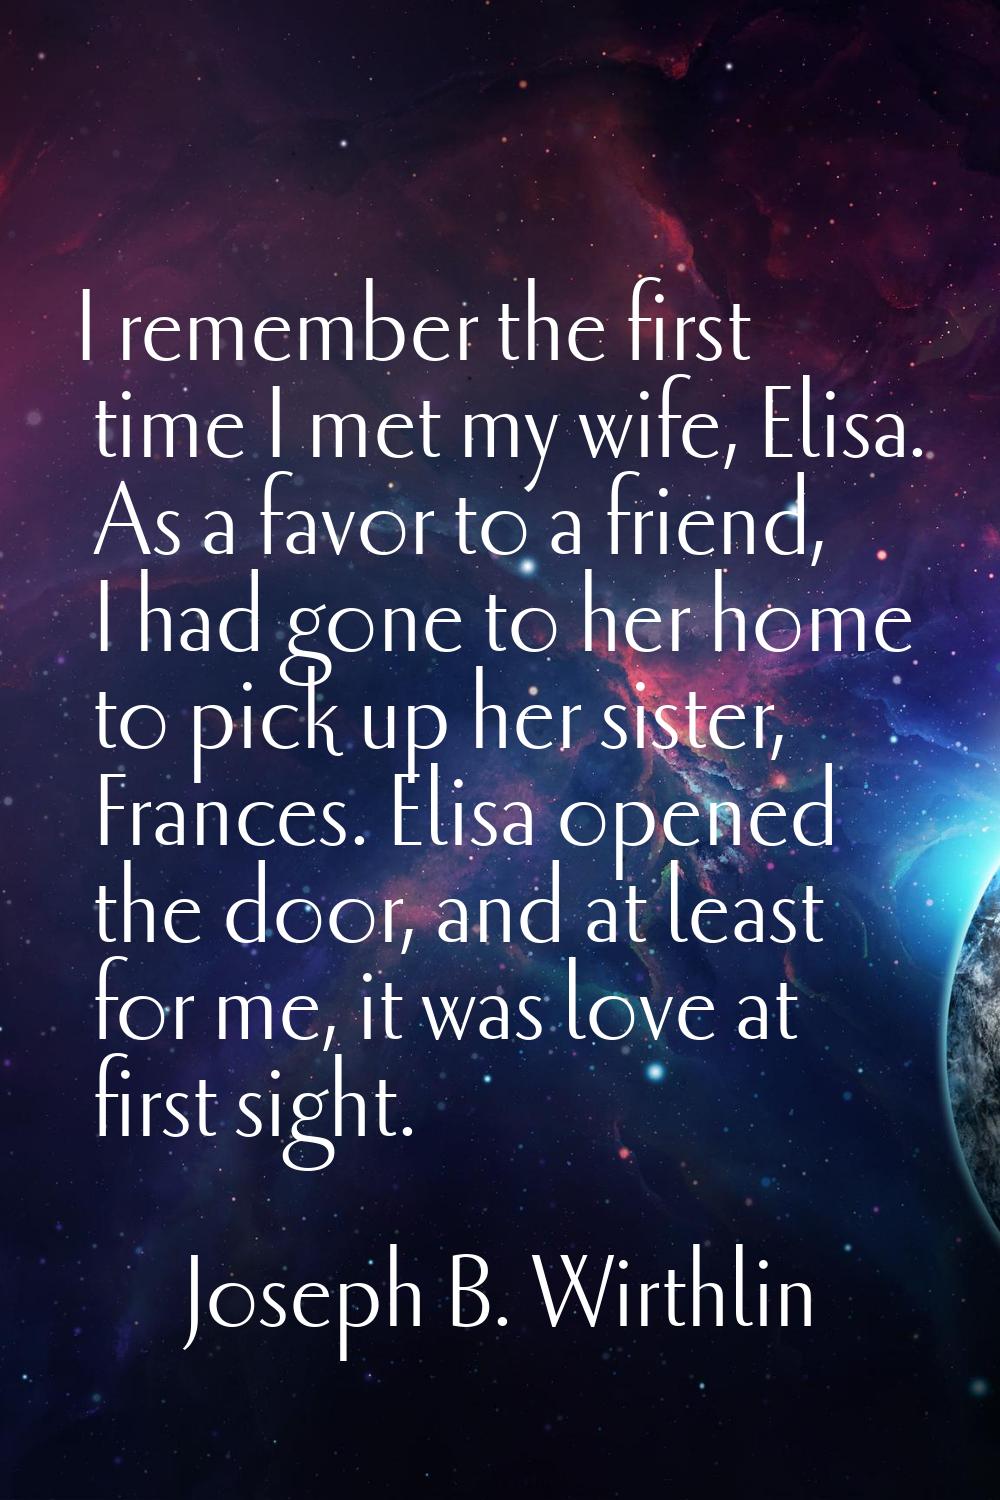 I remember the first time I met my wife, Elisa. As a favor to a friend, I had gone to her home to p